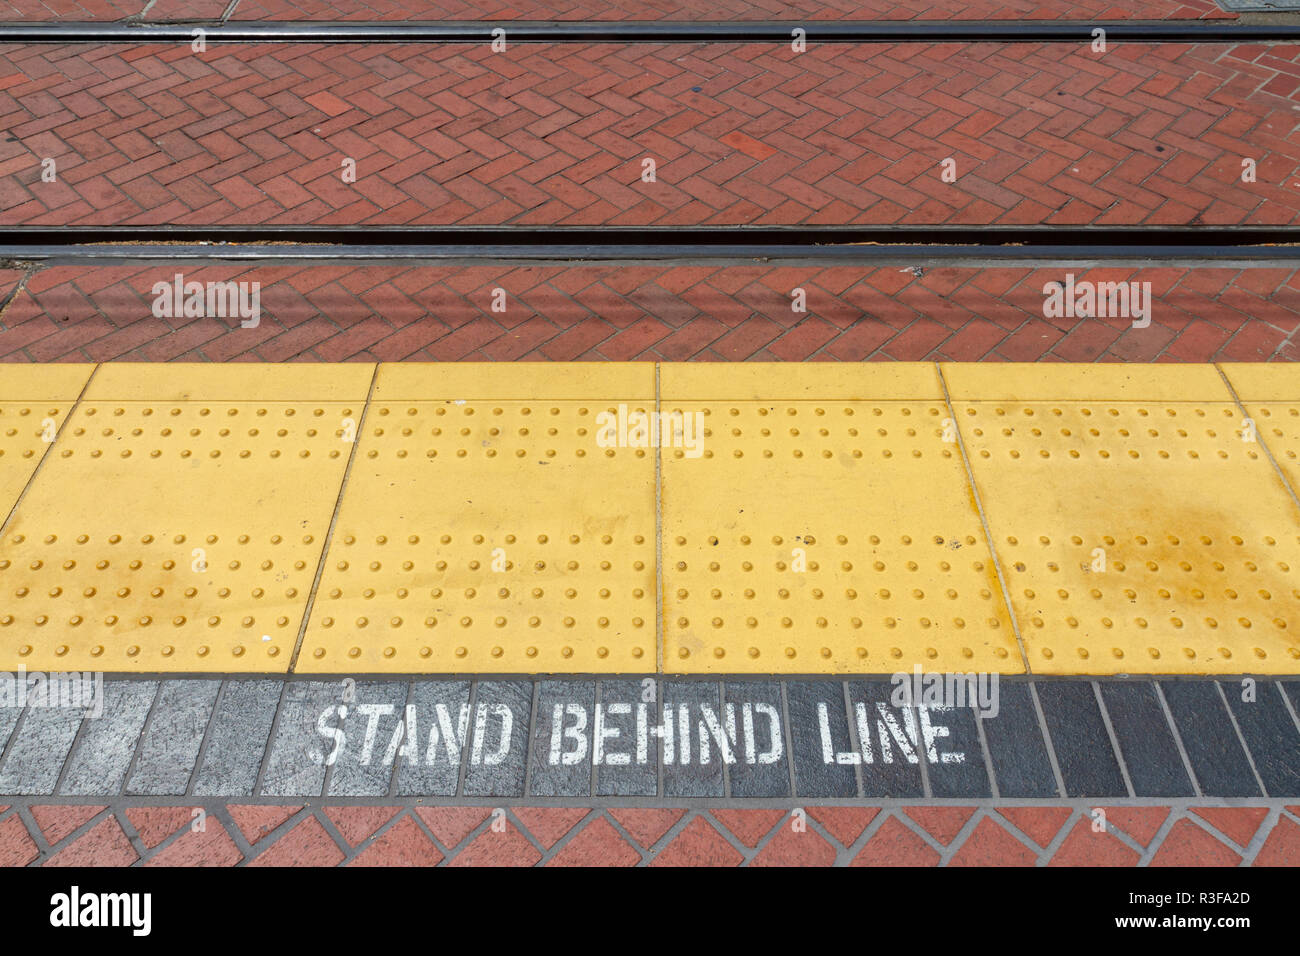 'Stand Behind Line' notice & dimpled yellow strip on the platform edge of a San Diego Trolley (train) system station, San Diego, CA, USA. Stock Photo